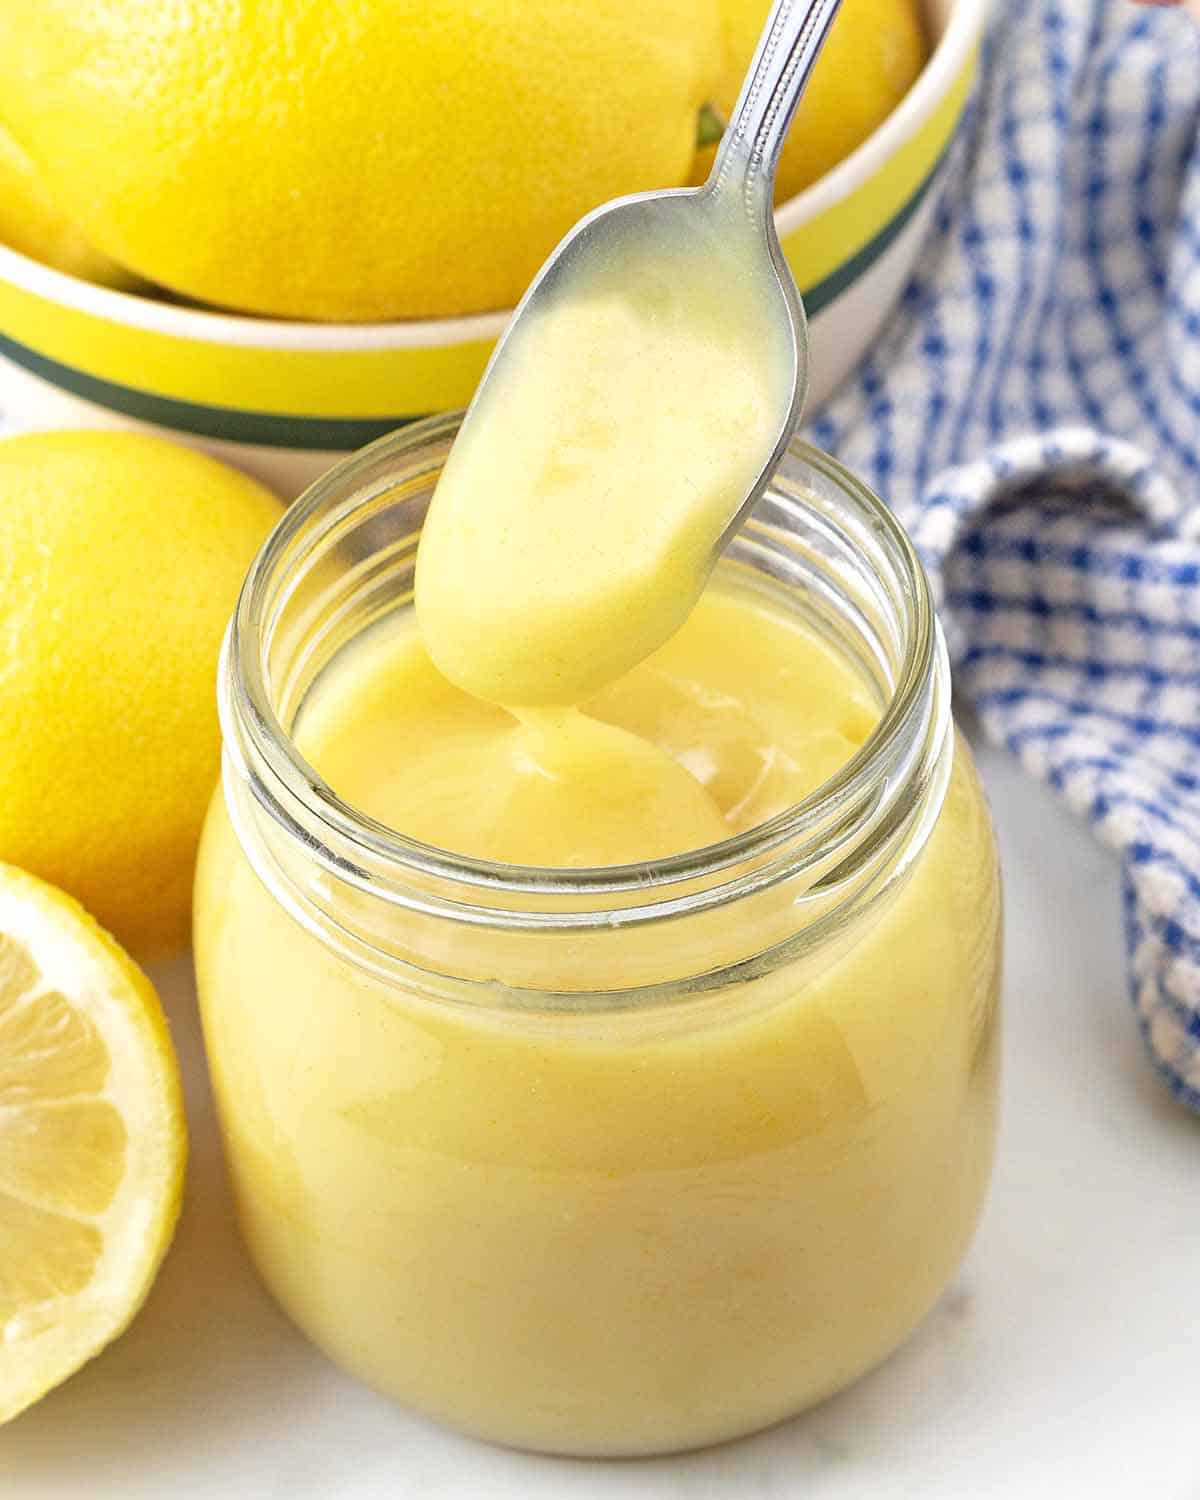 A small spoon that was just dipped into a jar of eggless lemon curd being pulled out of the jar.